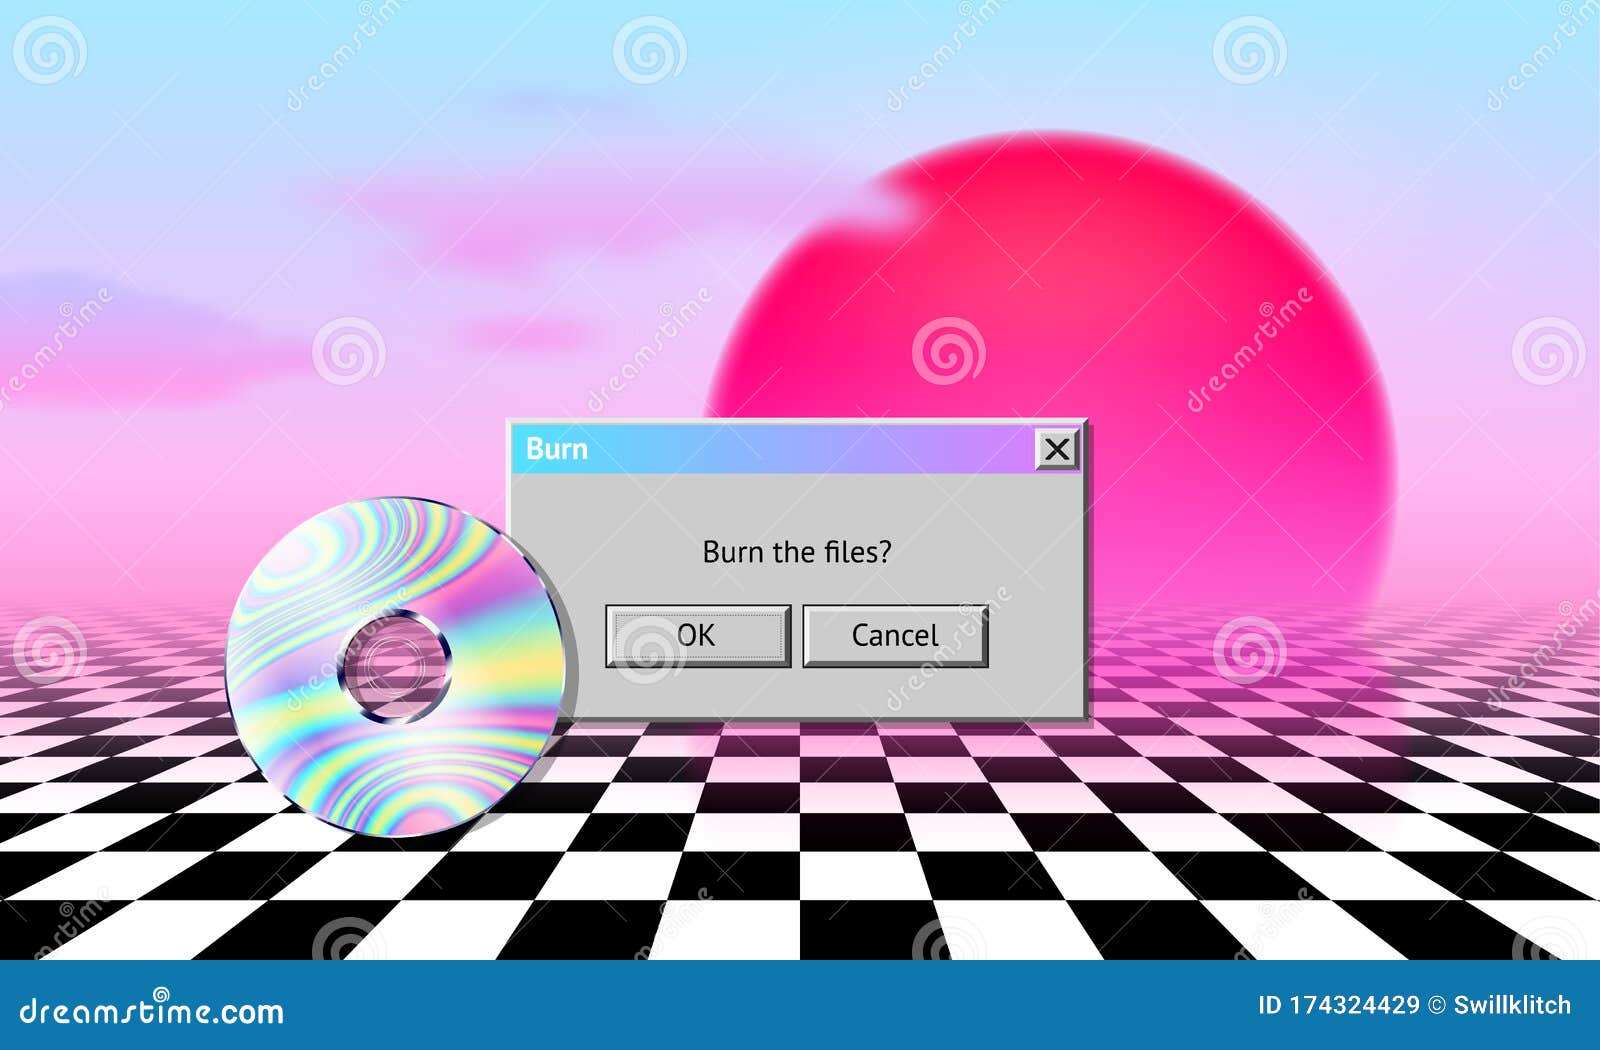 Vaporwave Landscape With CD, Dialogue Window, Sun, Clouds And ...